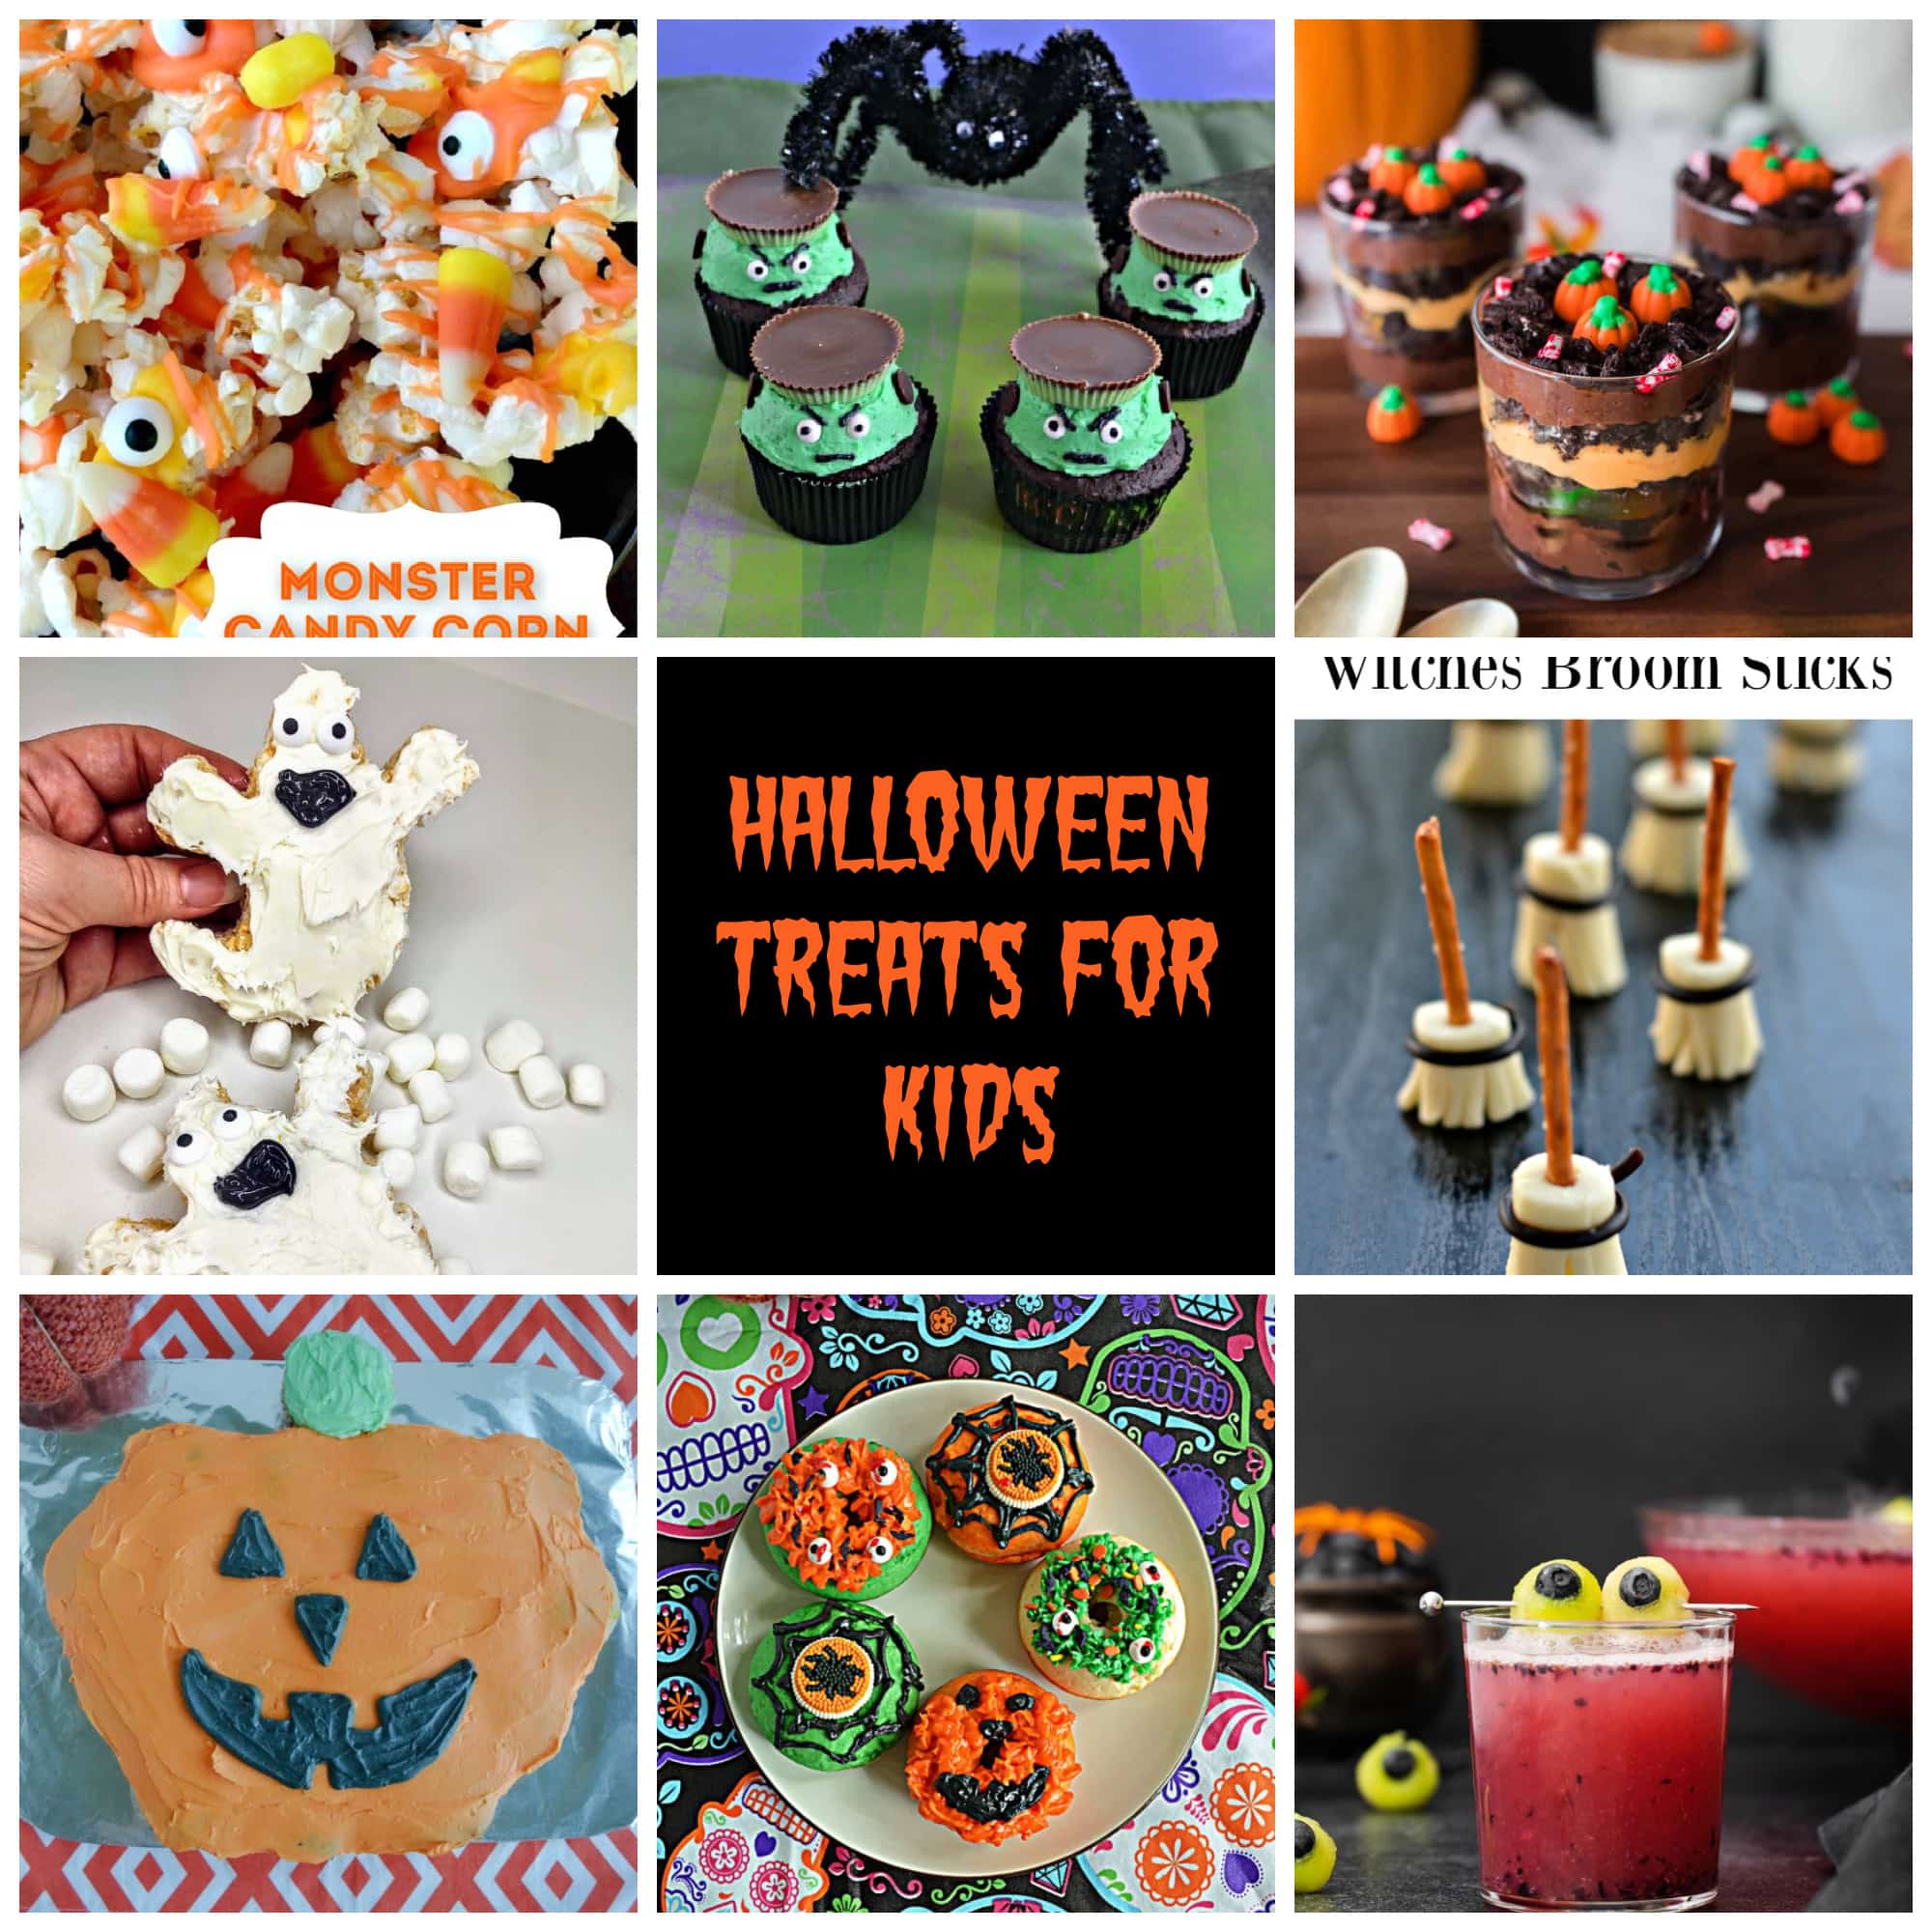 Pin Collage:   Halloween popcorn, Frankenstein cupcakes, Pudding cups topped with pumpkins, Ghost cookies, text title, Cheese brooms, pumpkin cake, monster donuts, pink drink.